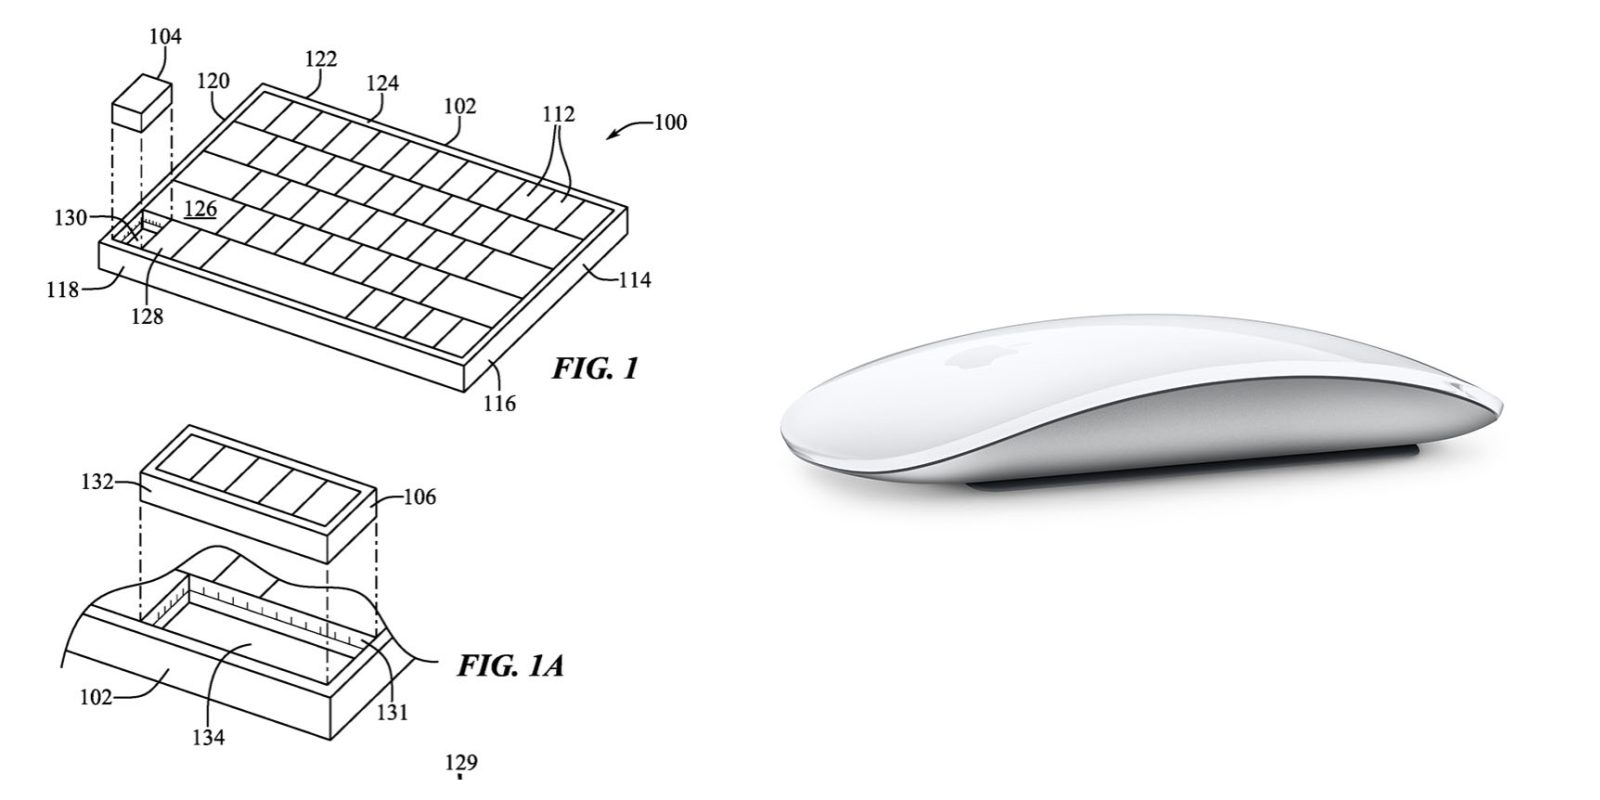 Removable MacBook keys could act as mouse